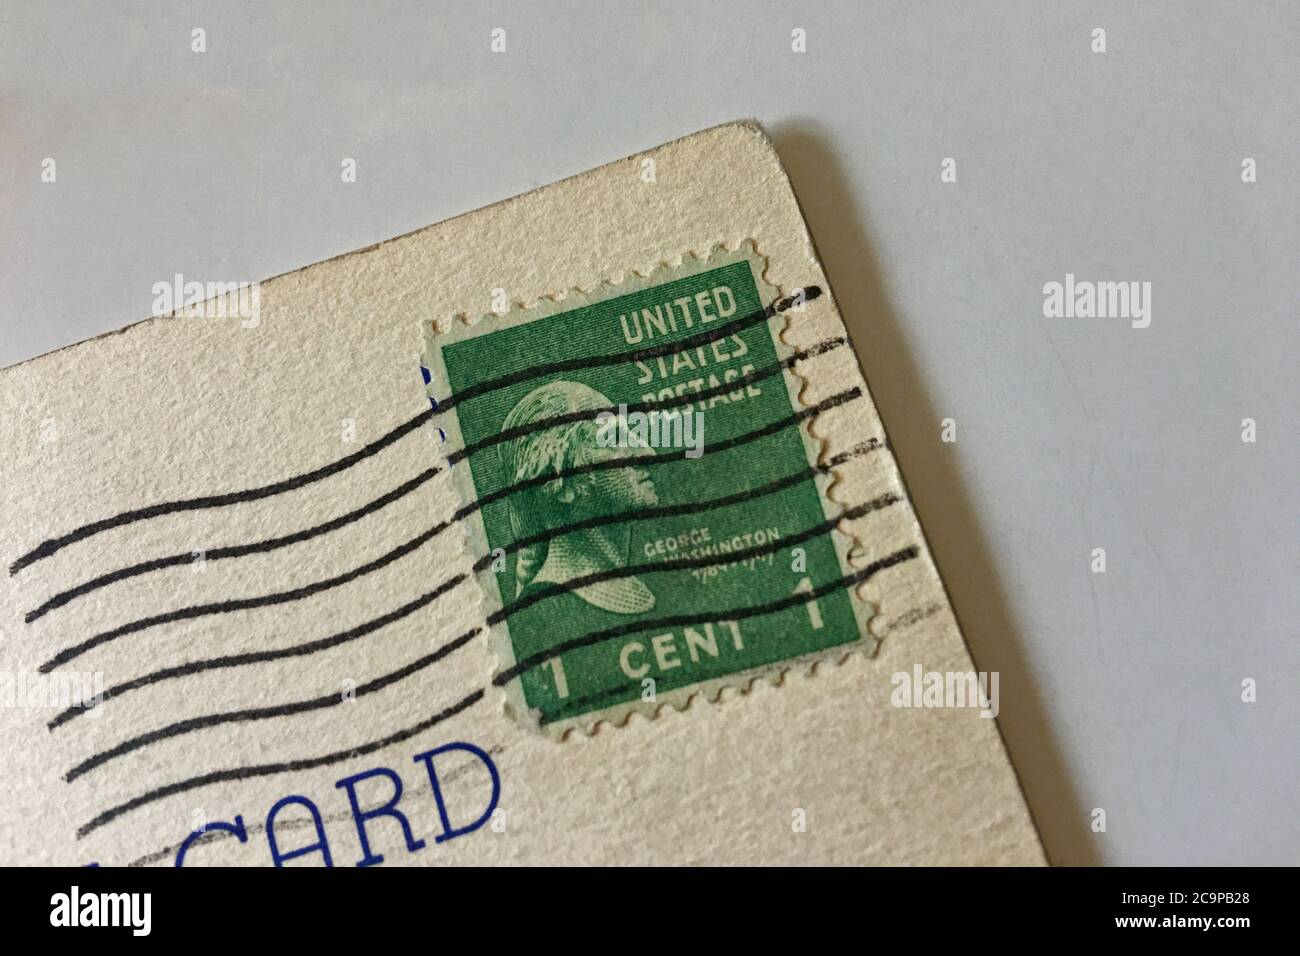 A United States Postage Stamp for one cent used to mail a post card in 1949. Stock Photo